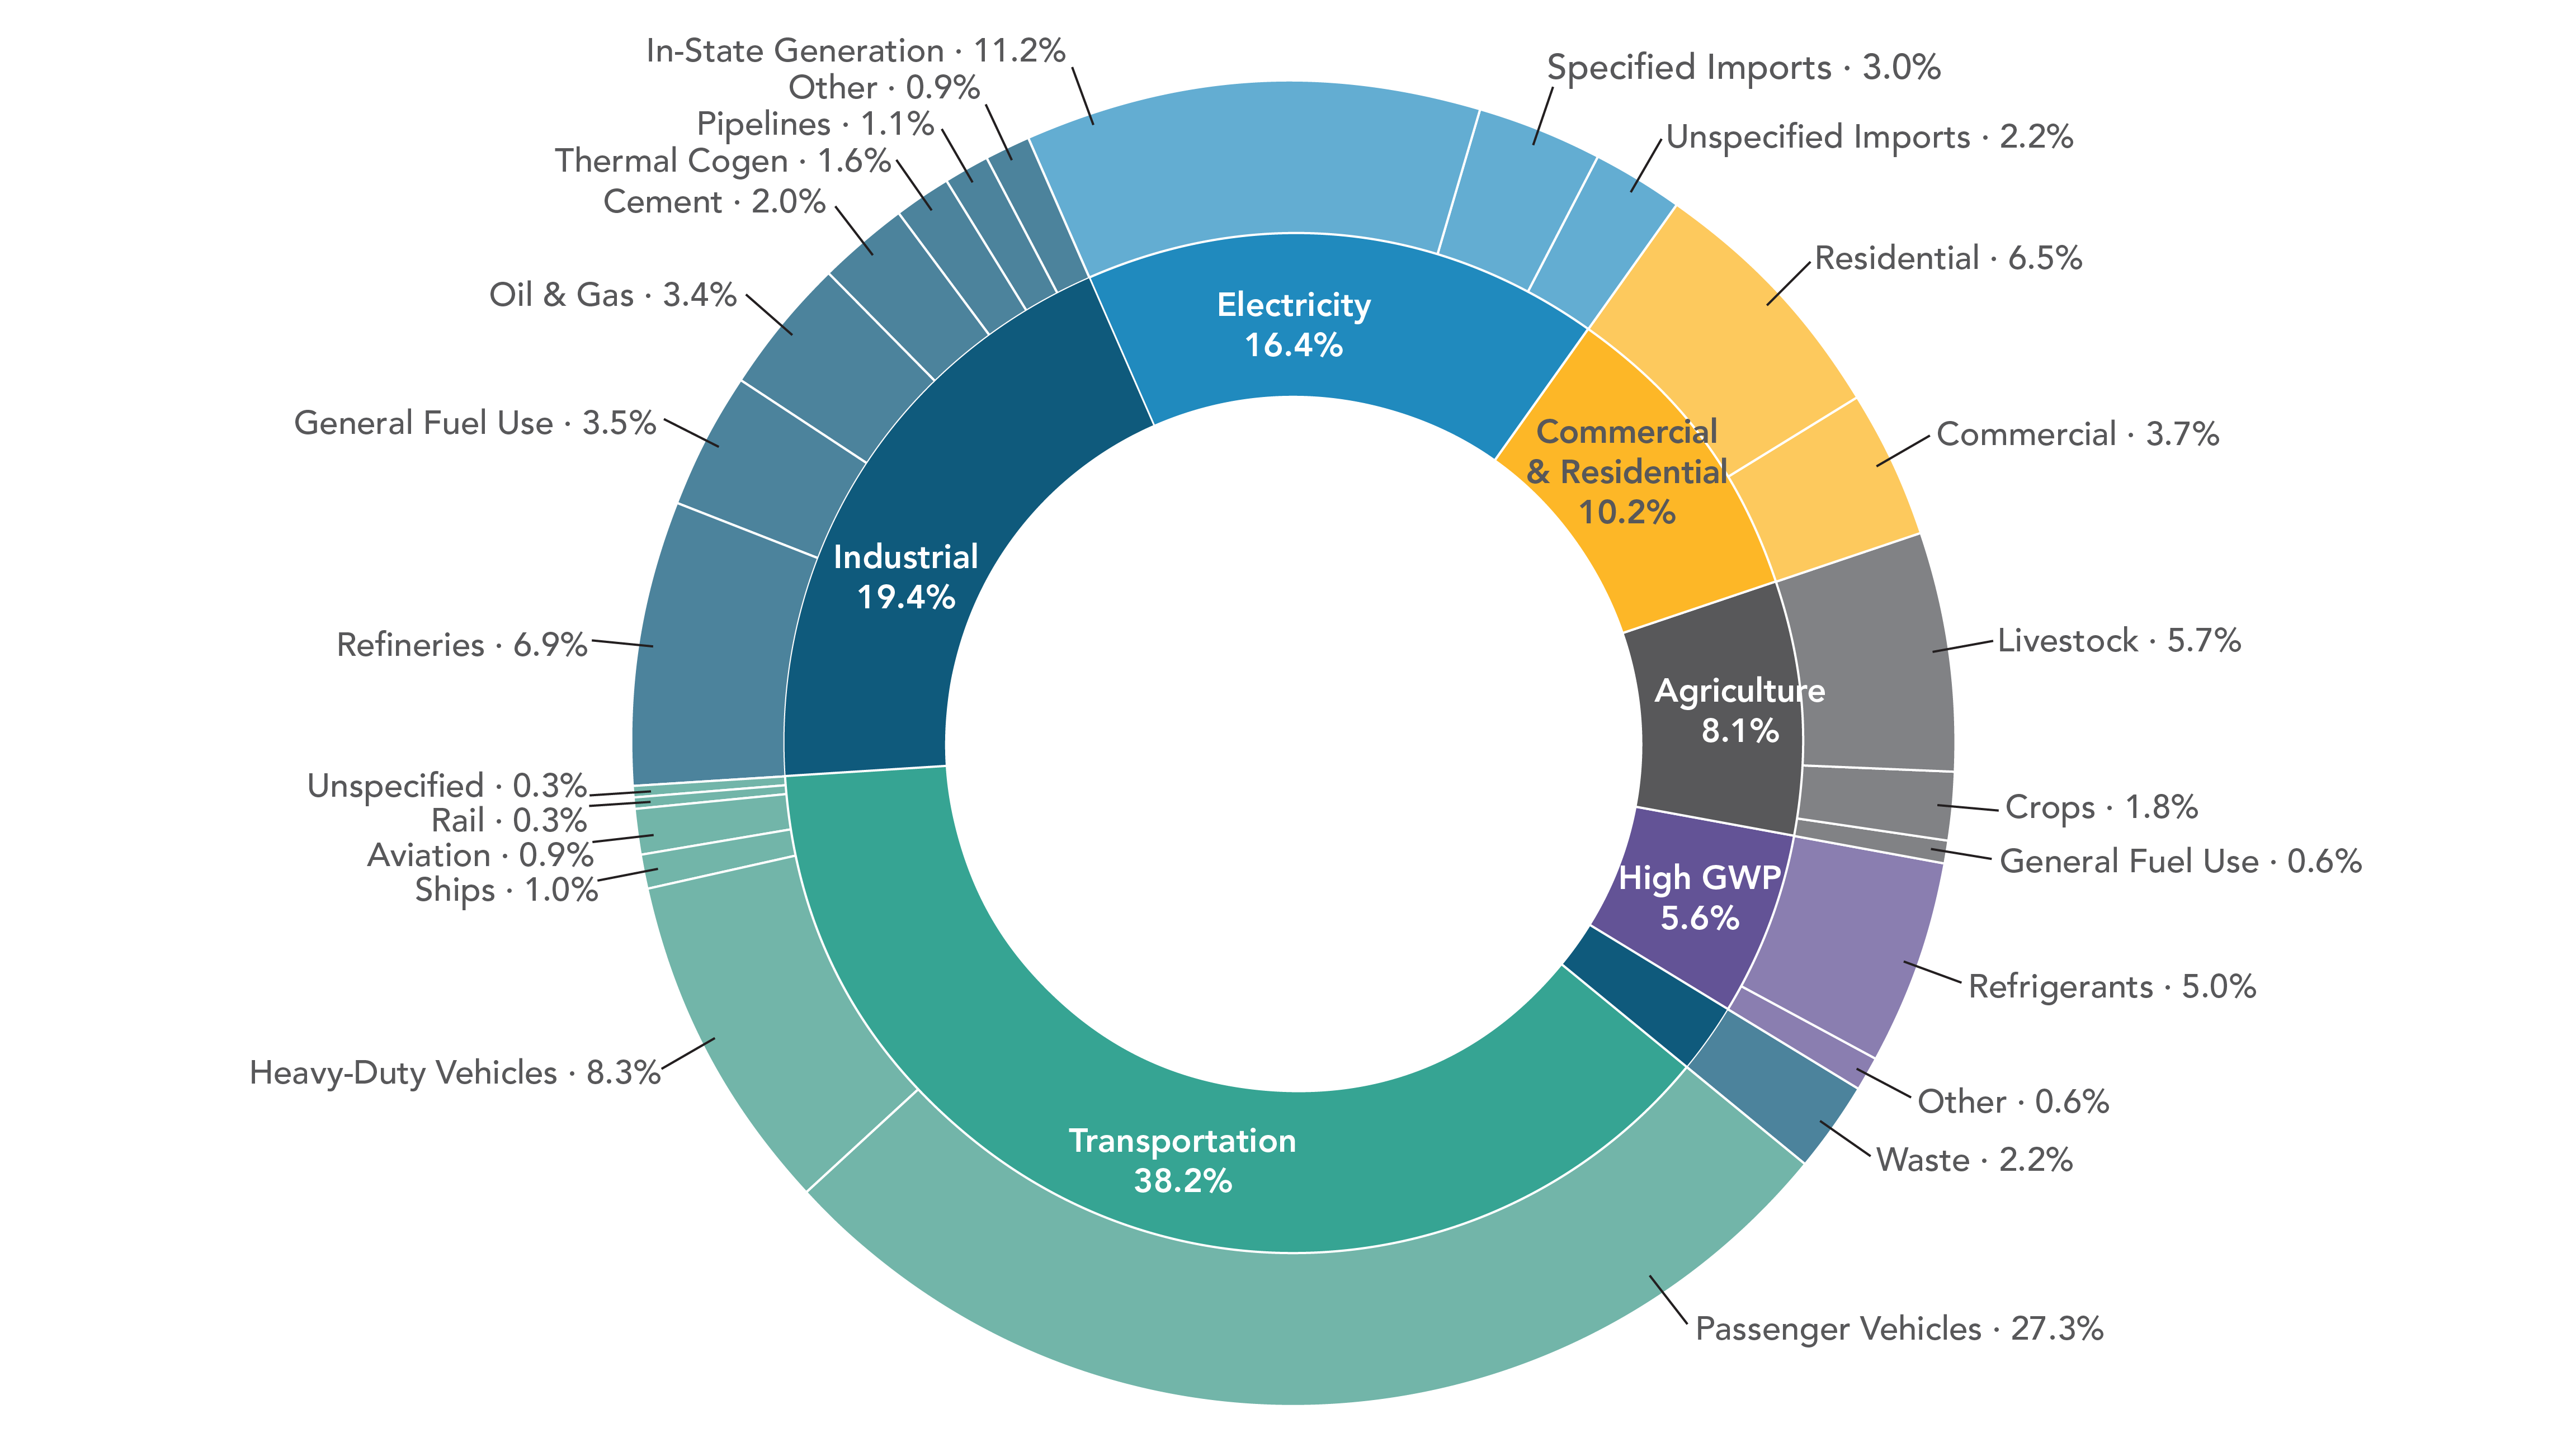 A multi-level pie chart showing 2021 GHG emissions by Scoping Plan category and sub-sector. The inner ring shows the Scoping Plan sectors, while the outer shows the sub-sectors. In descending order, from largest to smallest source of emissions, the sectors are: Transportation, Industrial, Electricity, Residential & Commercial, Agriculture, High GWP, and finally Waste. Transportation is composed of the following sub-sectors, from largest to smallest contributor: Passenger Vehicles, Heavy-Duty Vehicles, Ships, Aviation, Rail, and Unspecified. Industrial is composed of sub-sectors: Refineries, General Fuel Use, Oil & Gas, Cement, Thermal Cogen, Pipelines, and Other. Electricity is composed of sub-sectors: In-State Generation, Specified Imports, and Unspecified Imports. Residential & Commercial is composed of Residential and Commercial sub-sectors. Agriculture is composed of sub-sectors: Livestock, Crops, and General Fuel Use. High GWP is composed of sub-sectors: Refrigerants and Other. Waste has no sub-sectors. For more information on data displayed, contact ghginventory@arb.ca.gov.  